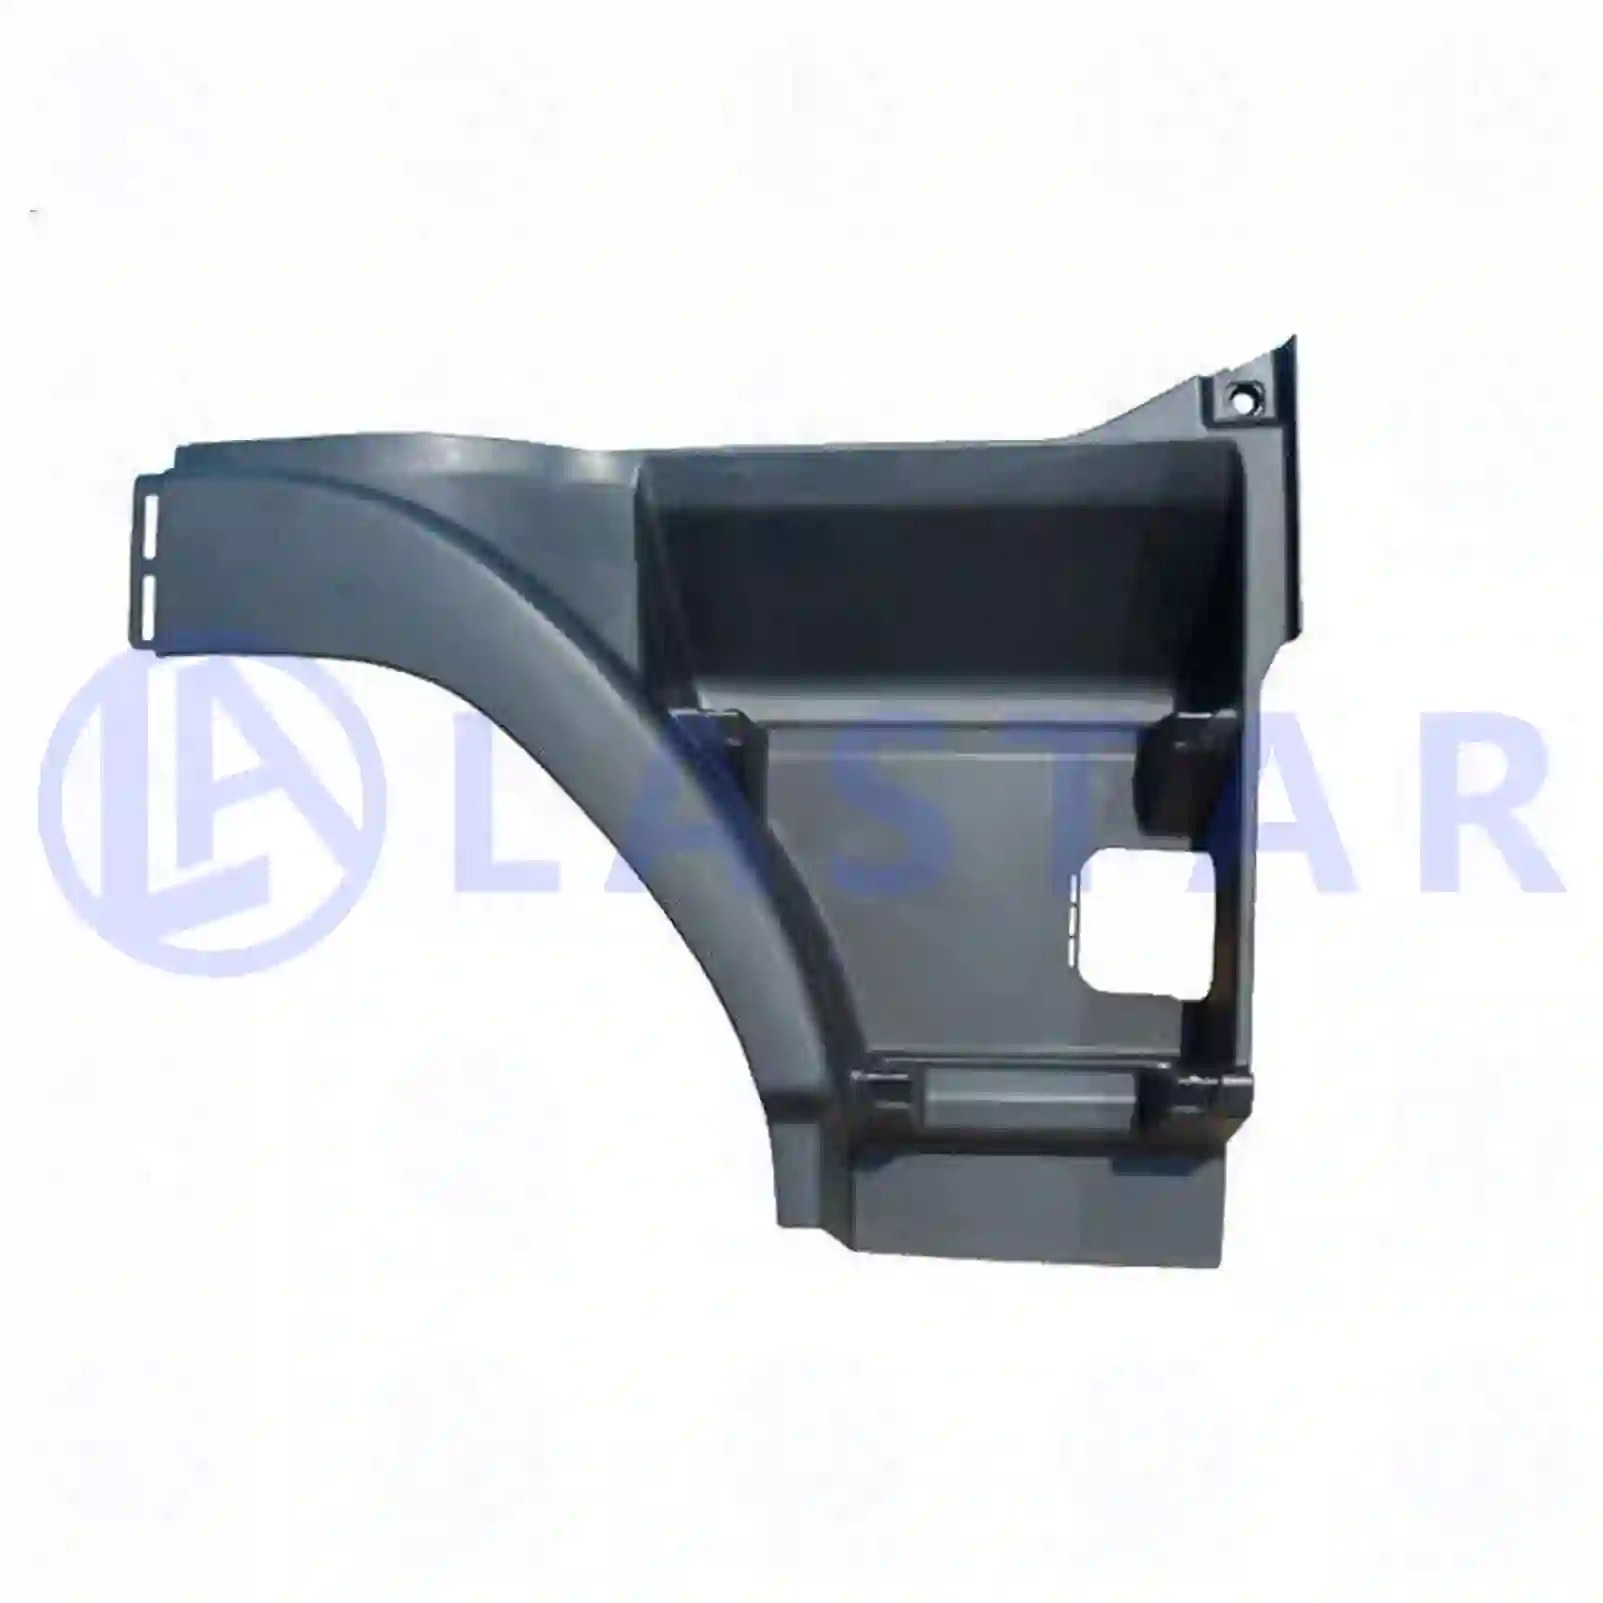 Boarding Step Step well case, right, la no: 77718072 ,  oem no:3175247, 3981764, 8144108, 8189196, 8189301 Lastar Spare Part | Truck Spare Parts, Auotomotive Spare Parts